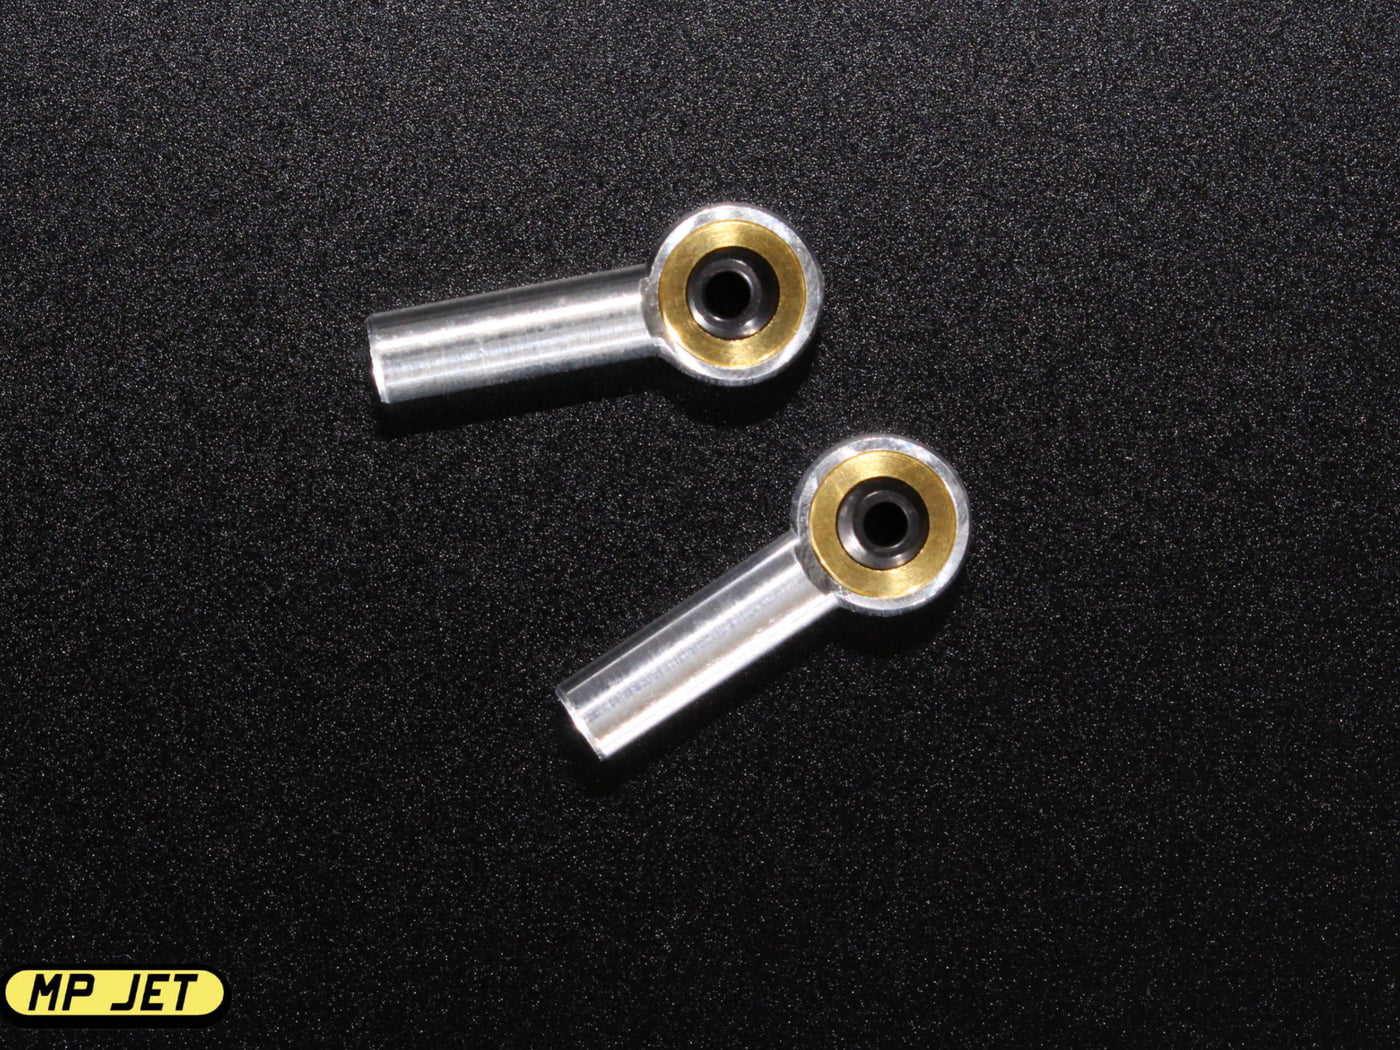 MP Jet Ball Link V3 / 5mm ball with 2mm hole / M2.5